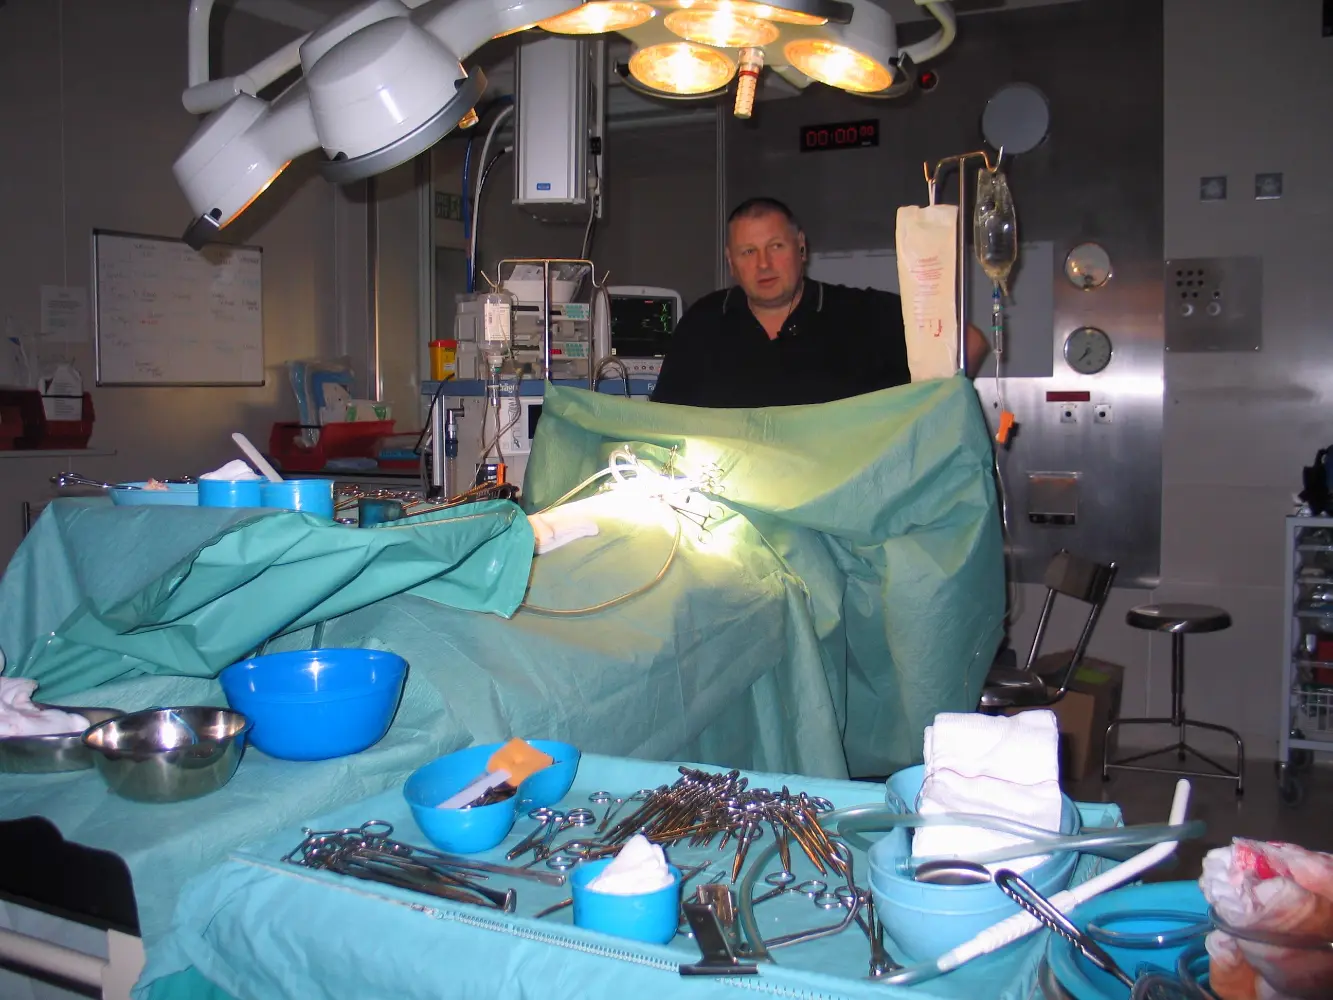 Carlton Jarvis in an operating theatre set